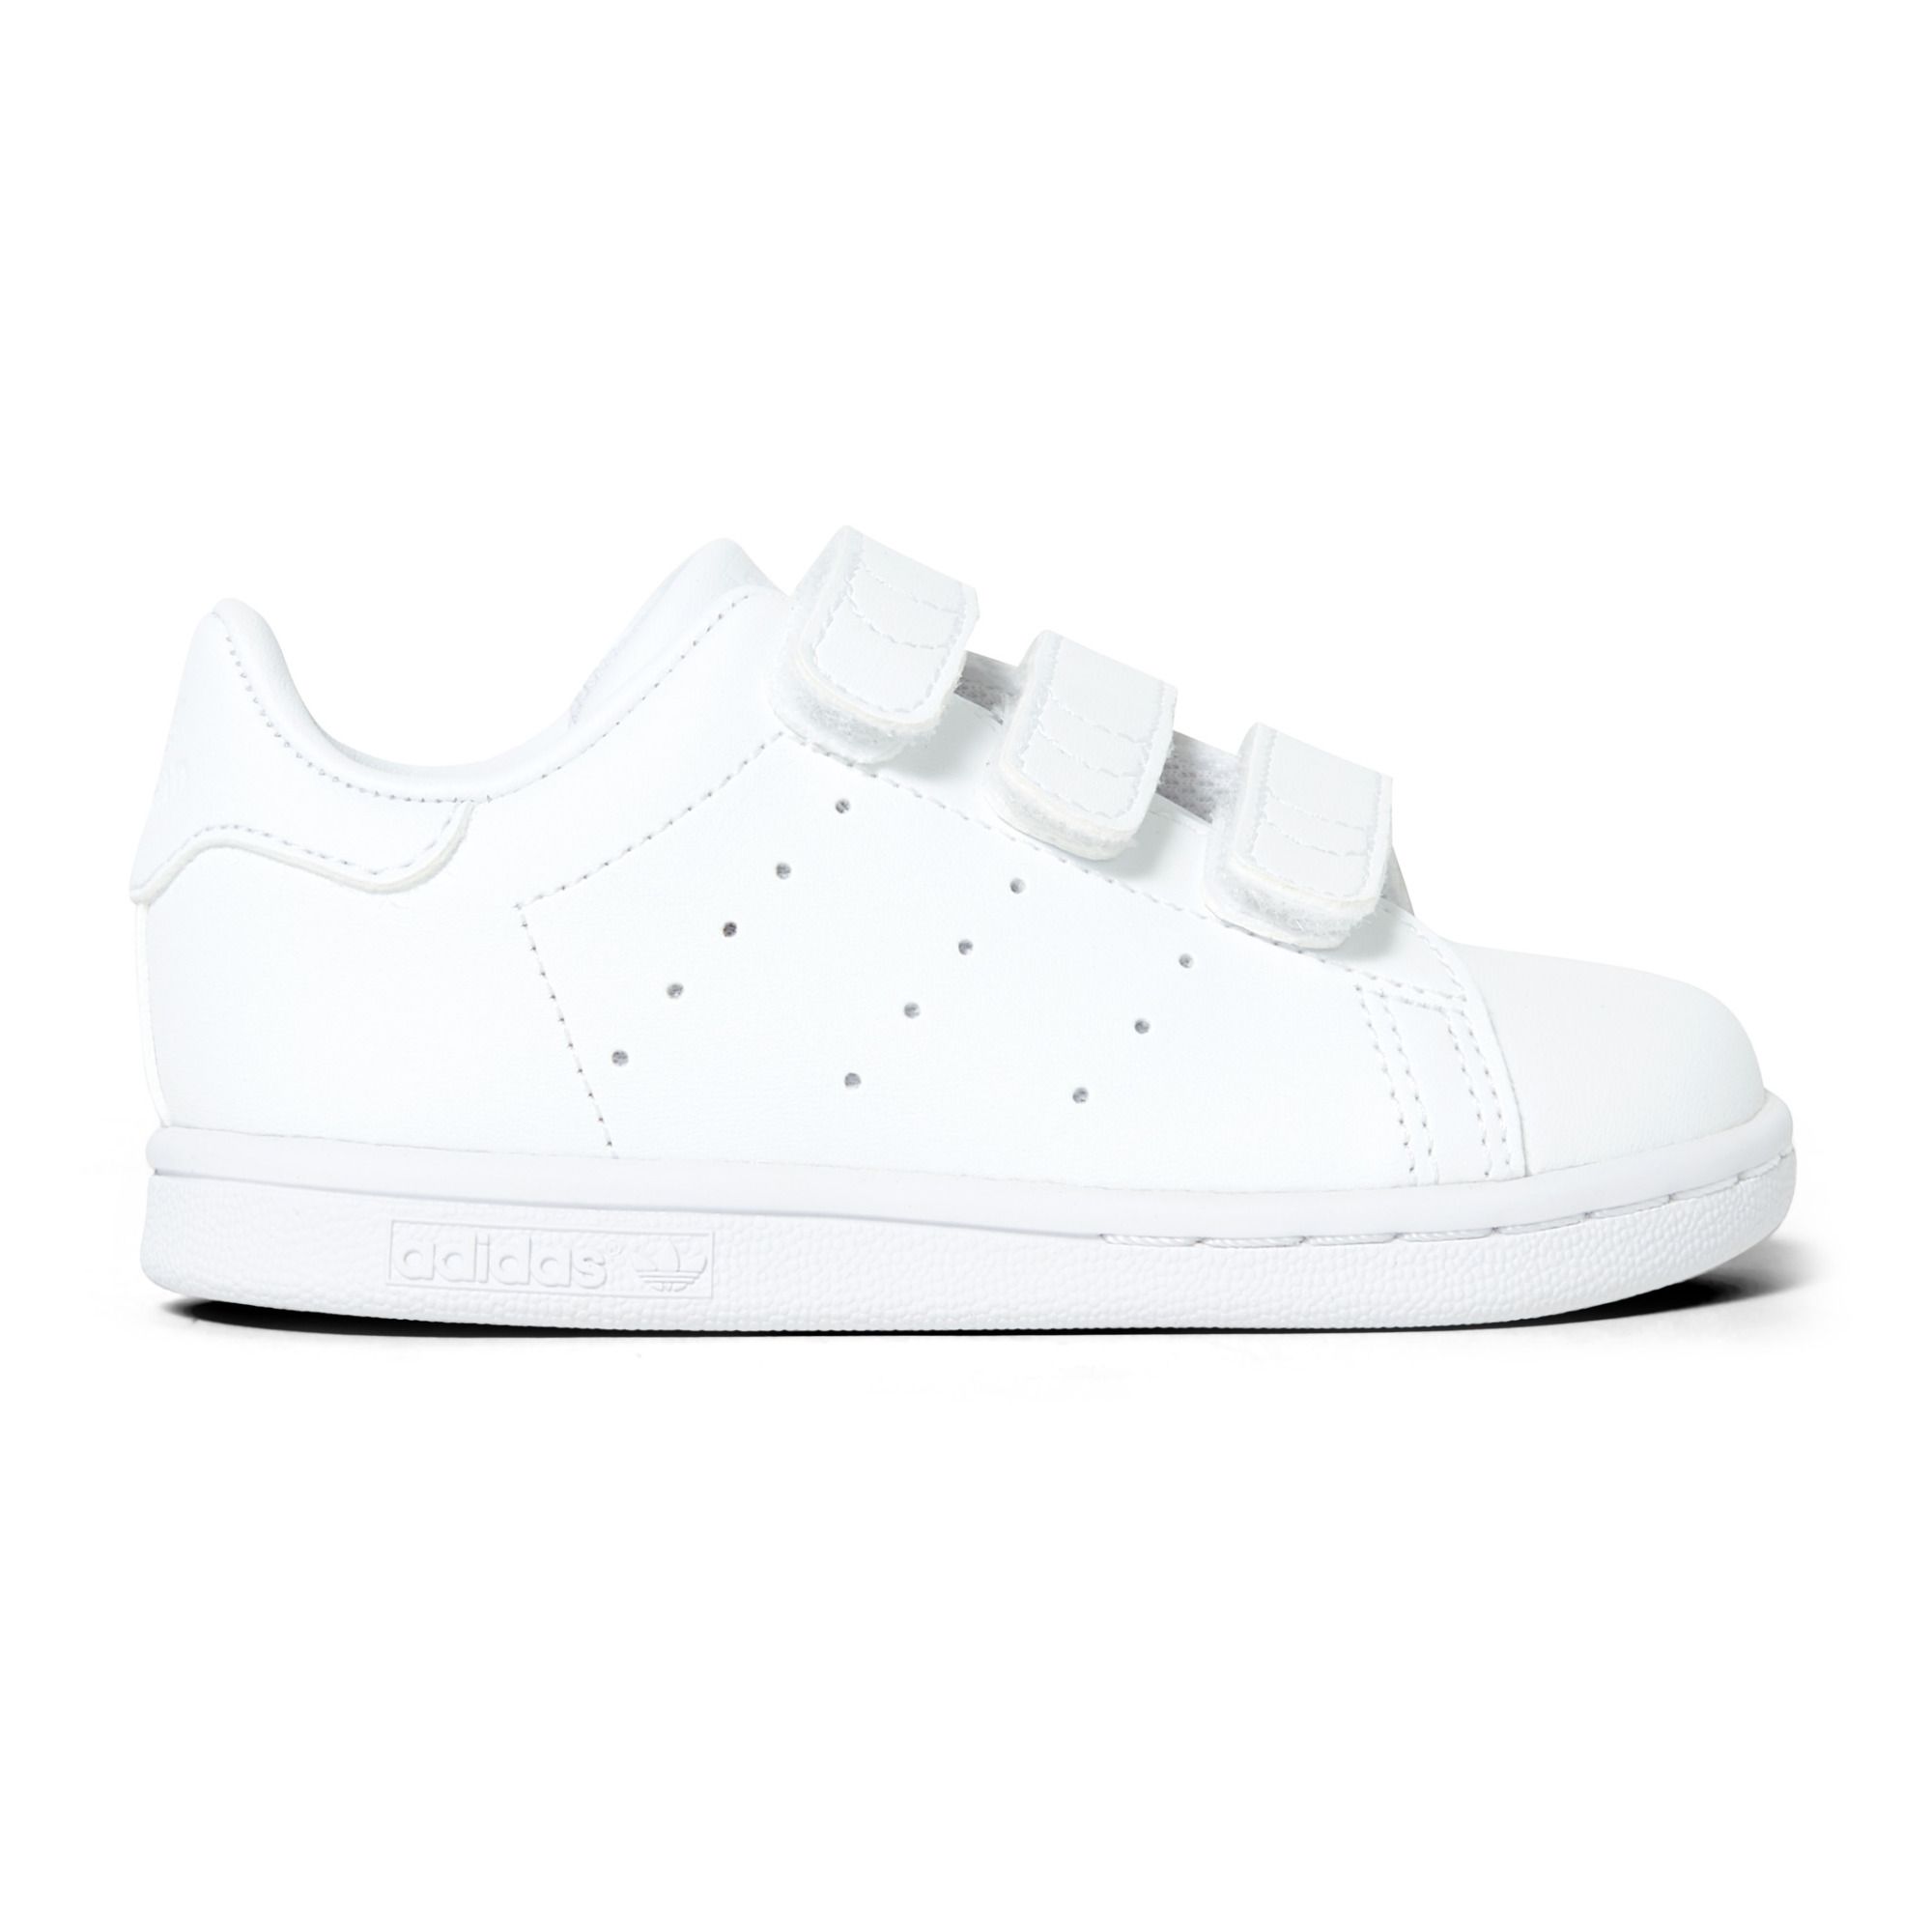 Adidas - Baskets Scratchs Unies Stan Smith Recyclées - Fille - Blanc